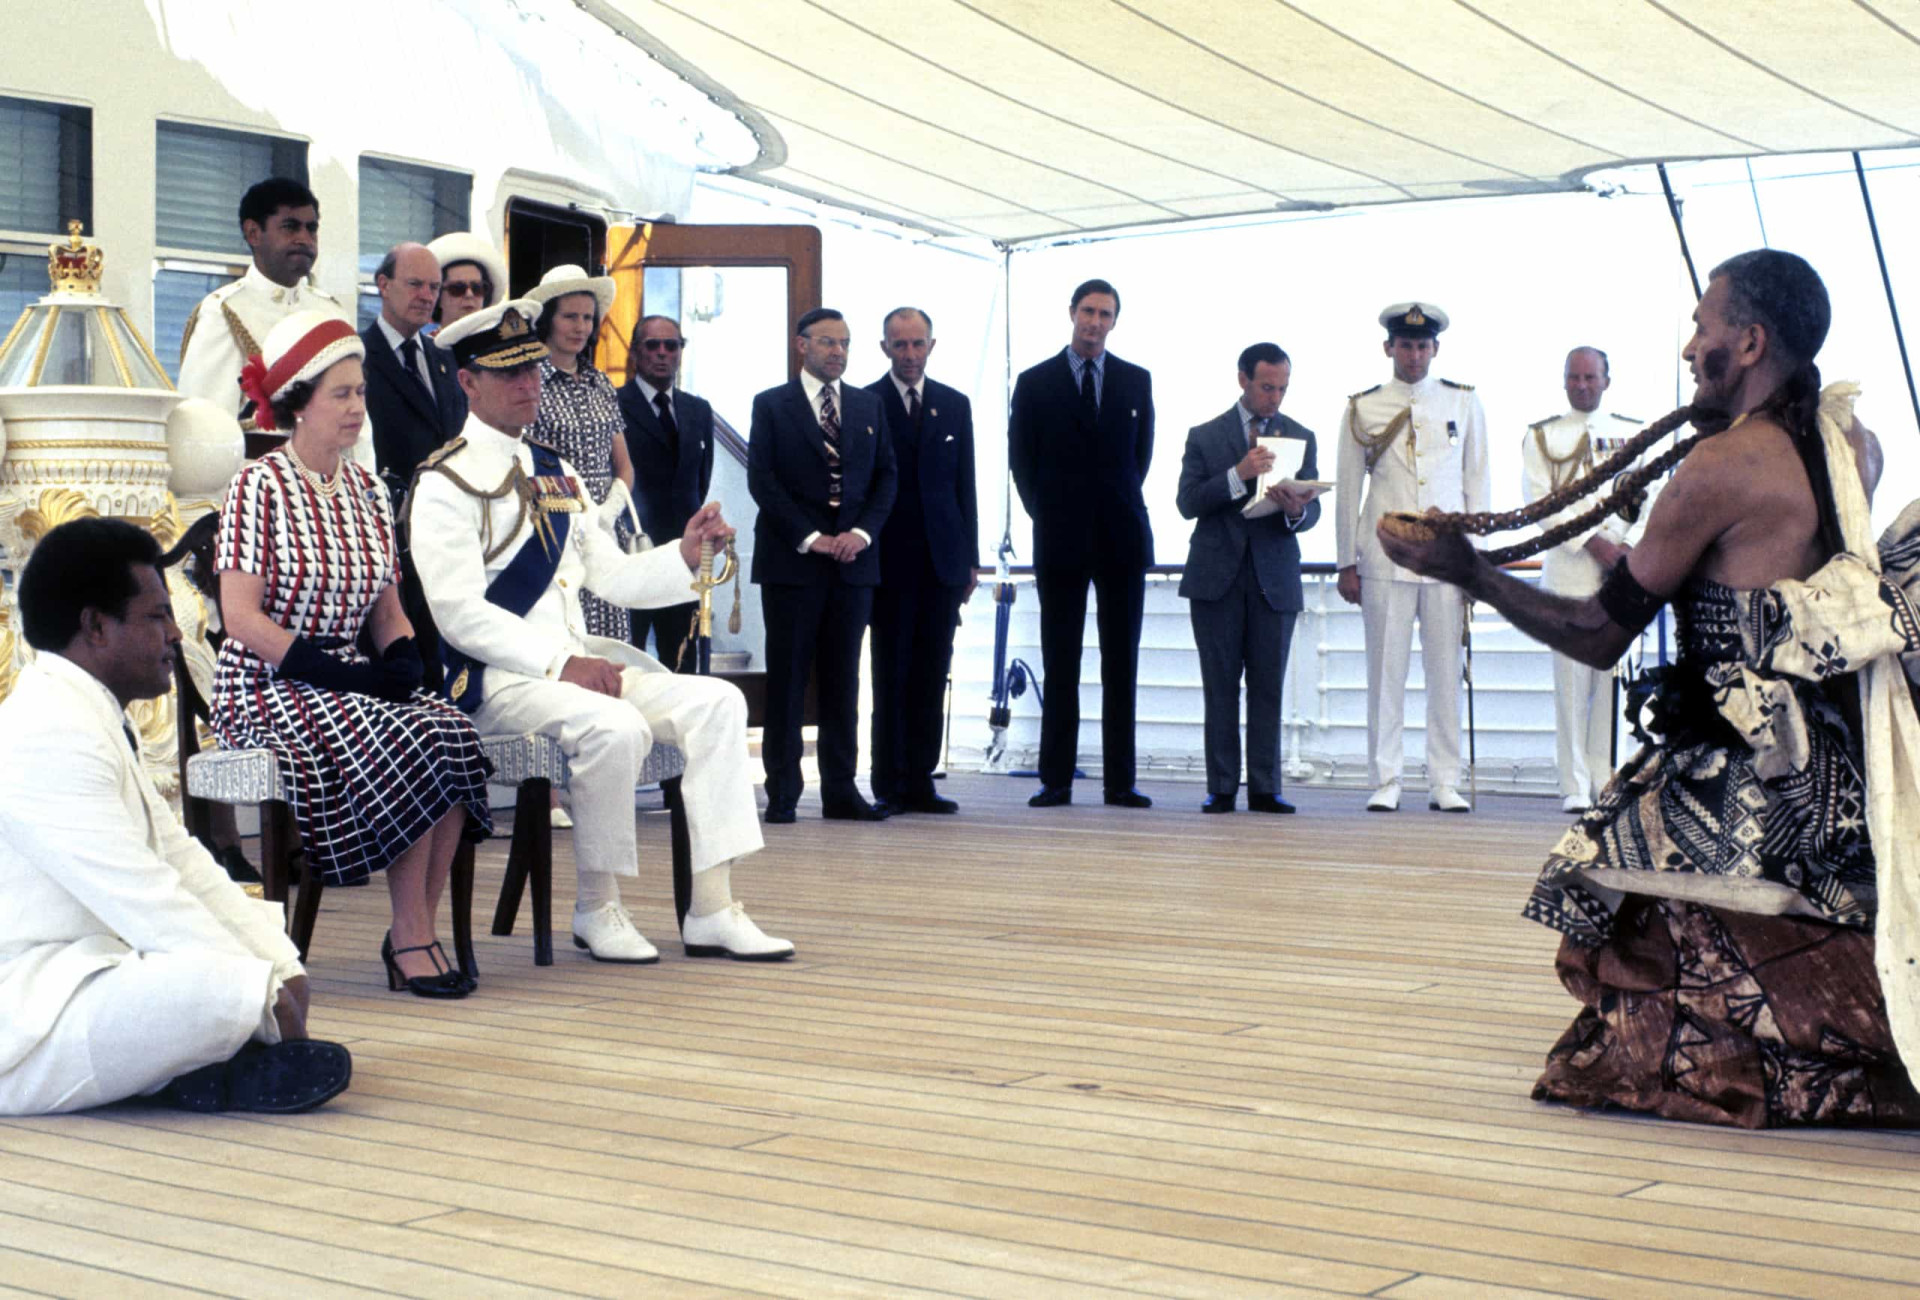 <p>Later in the summer, the Queen and Prince Philip embarked on a Commonwealth visit that first brought them to island nations such as Fiji and Tonga. Pictured is the royal couple receiving and being entertained by Fijian folk and traditional dancers on board  <em>Britannia</em>. The voyage continued later with longer stints in New Zealand and Australia.</p><p><a href="https://www.msn.com/en-ph/community/channel/vid-7xx8mnucu55yw63we9va2gwr7uihbxwc68fxqp25x6tg4ftibpra?cvid=94631541bc0f4f89bfd59158d696ad7e">Follow us and access great exclusive content every day</a></p>